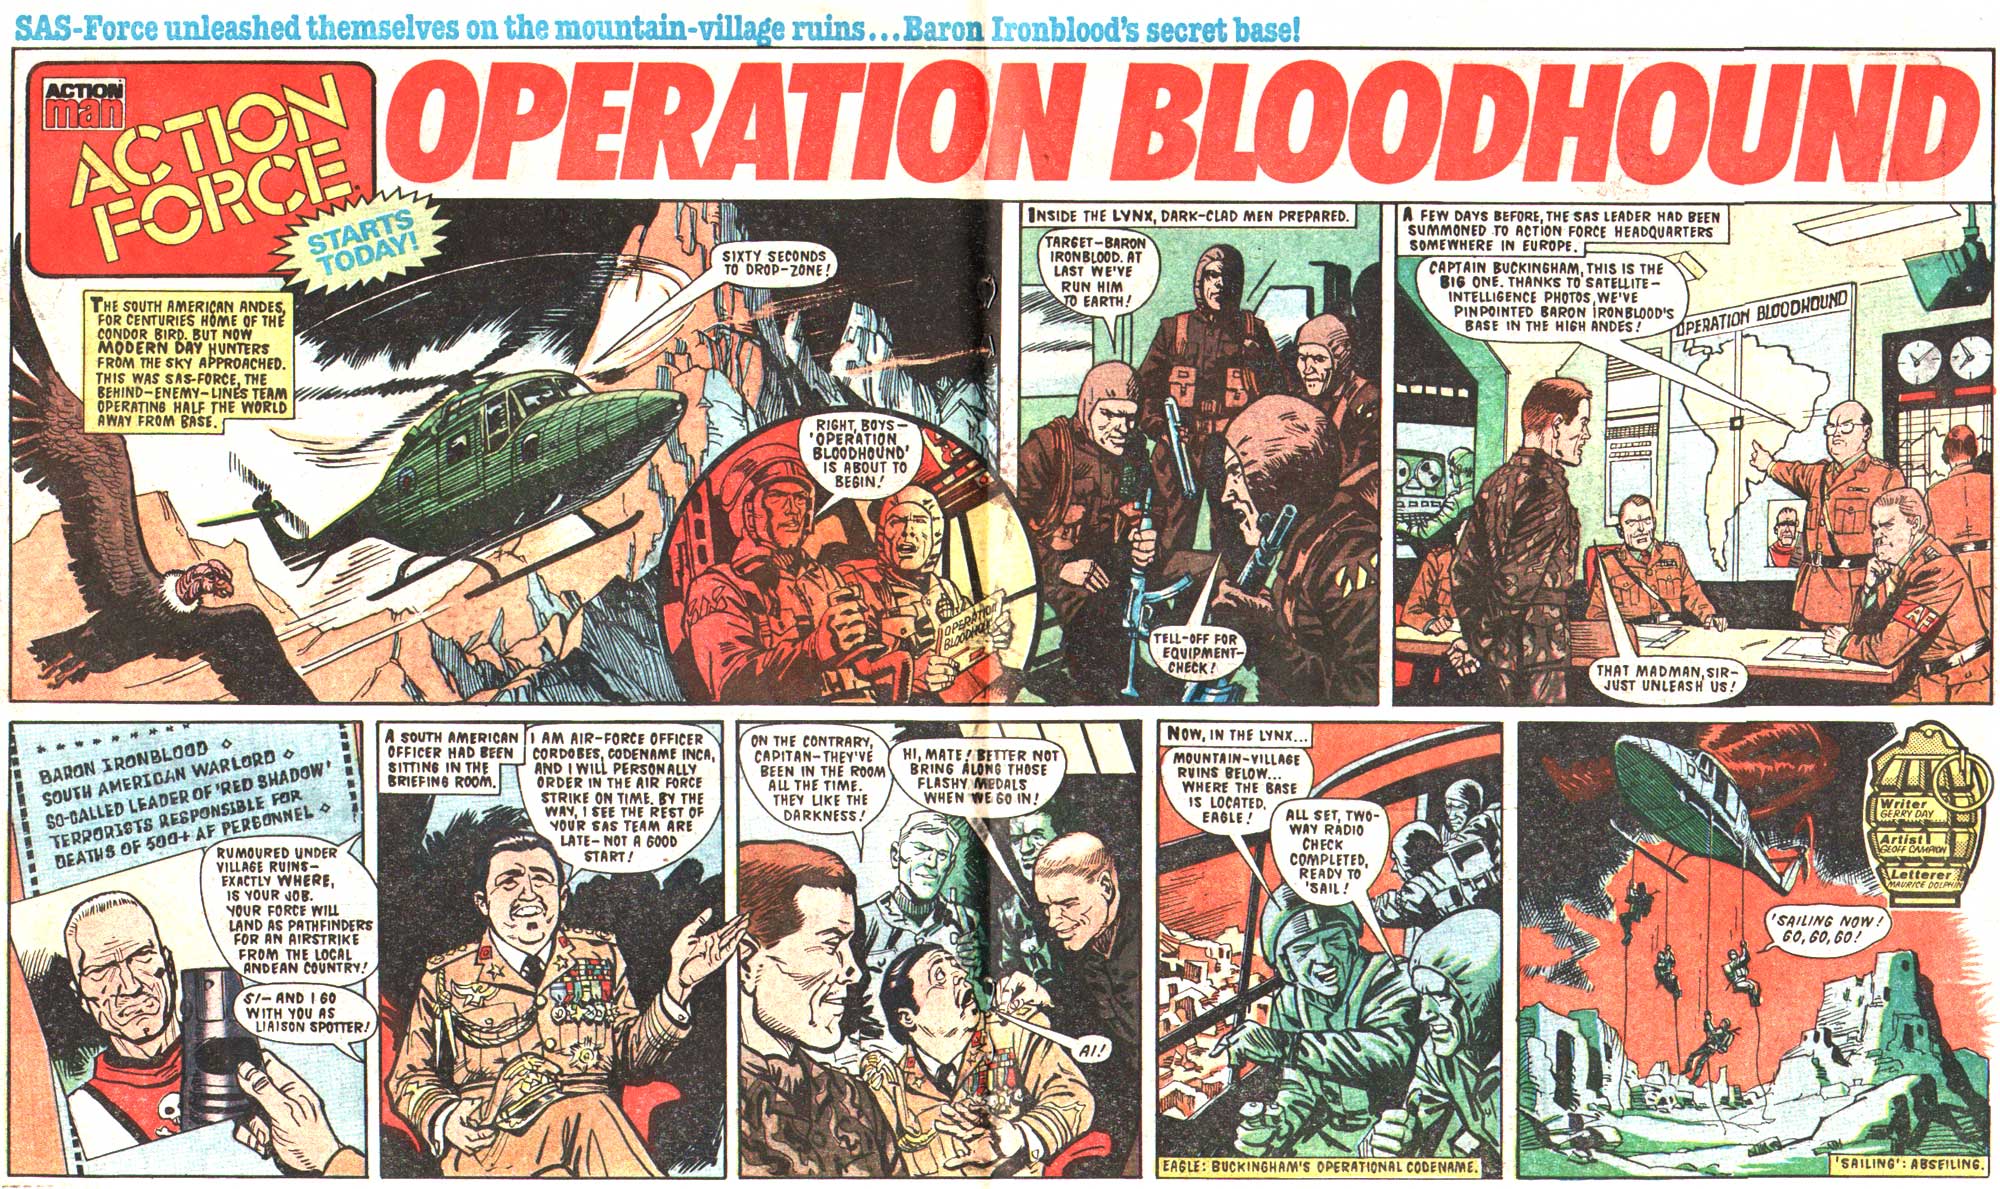 "Operation Bloodhound" from Battle Action Force - cover dated 8th October 1986